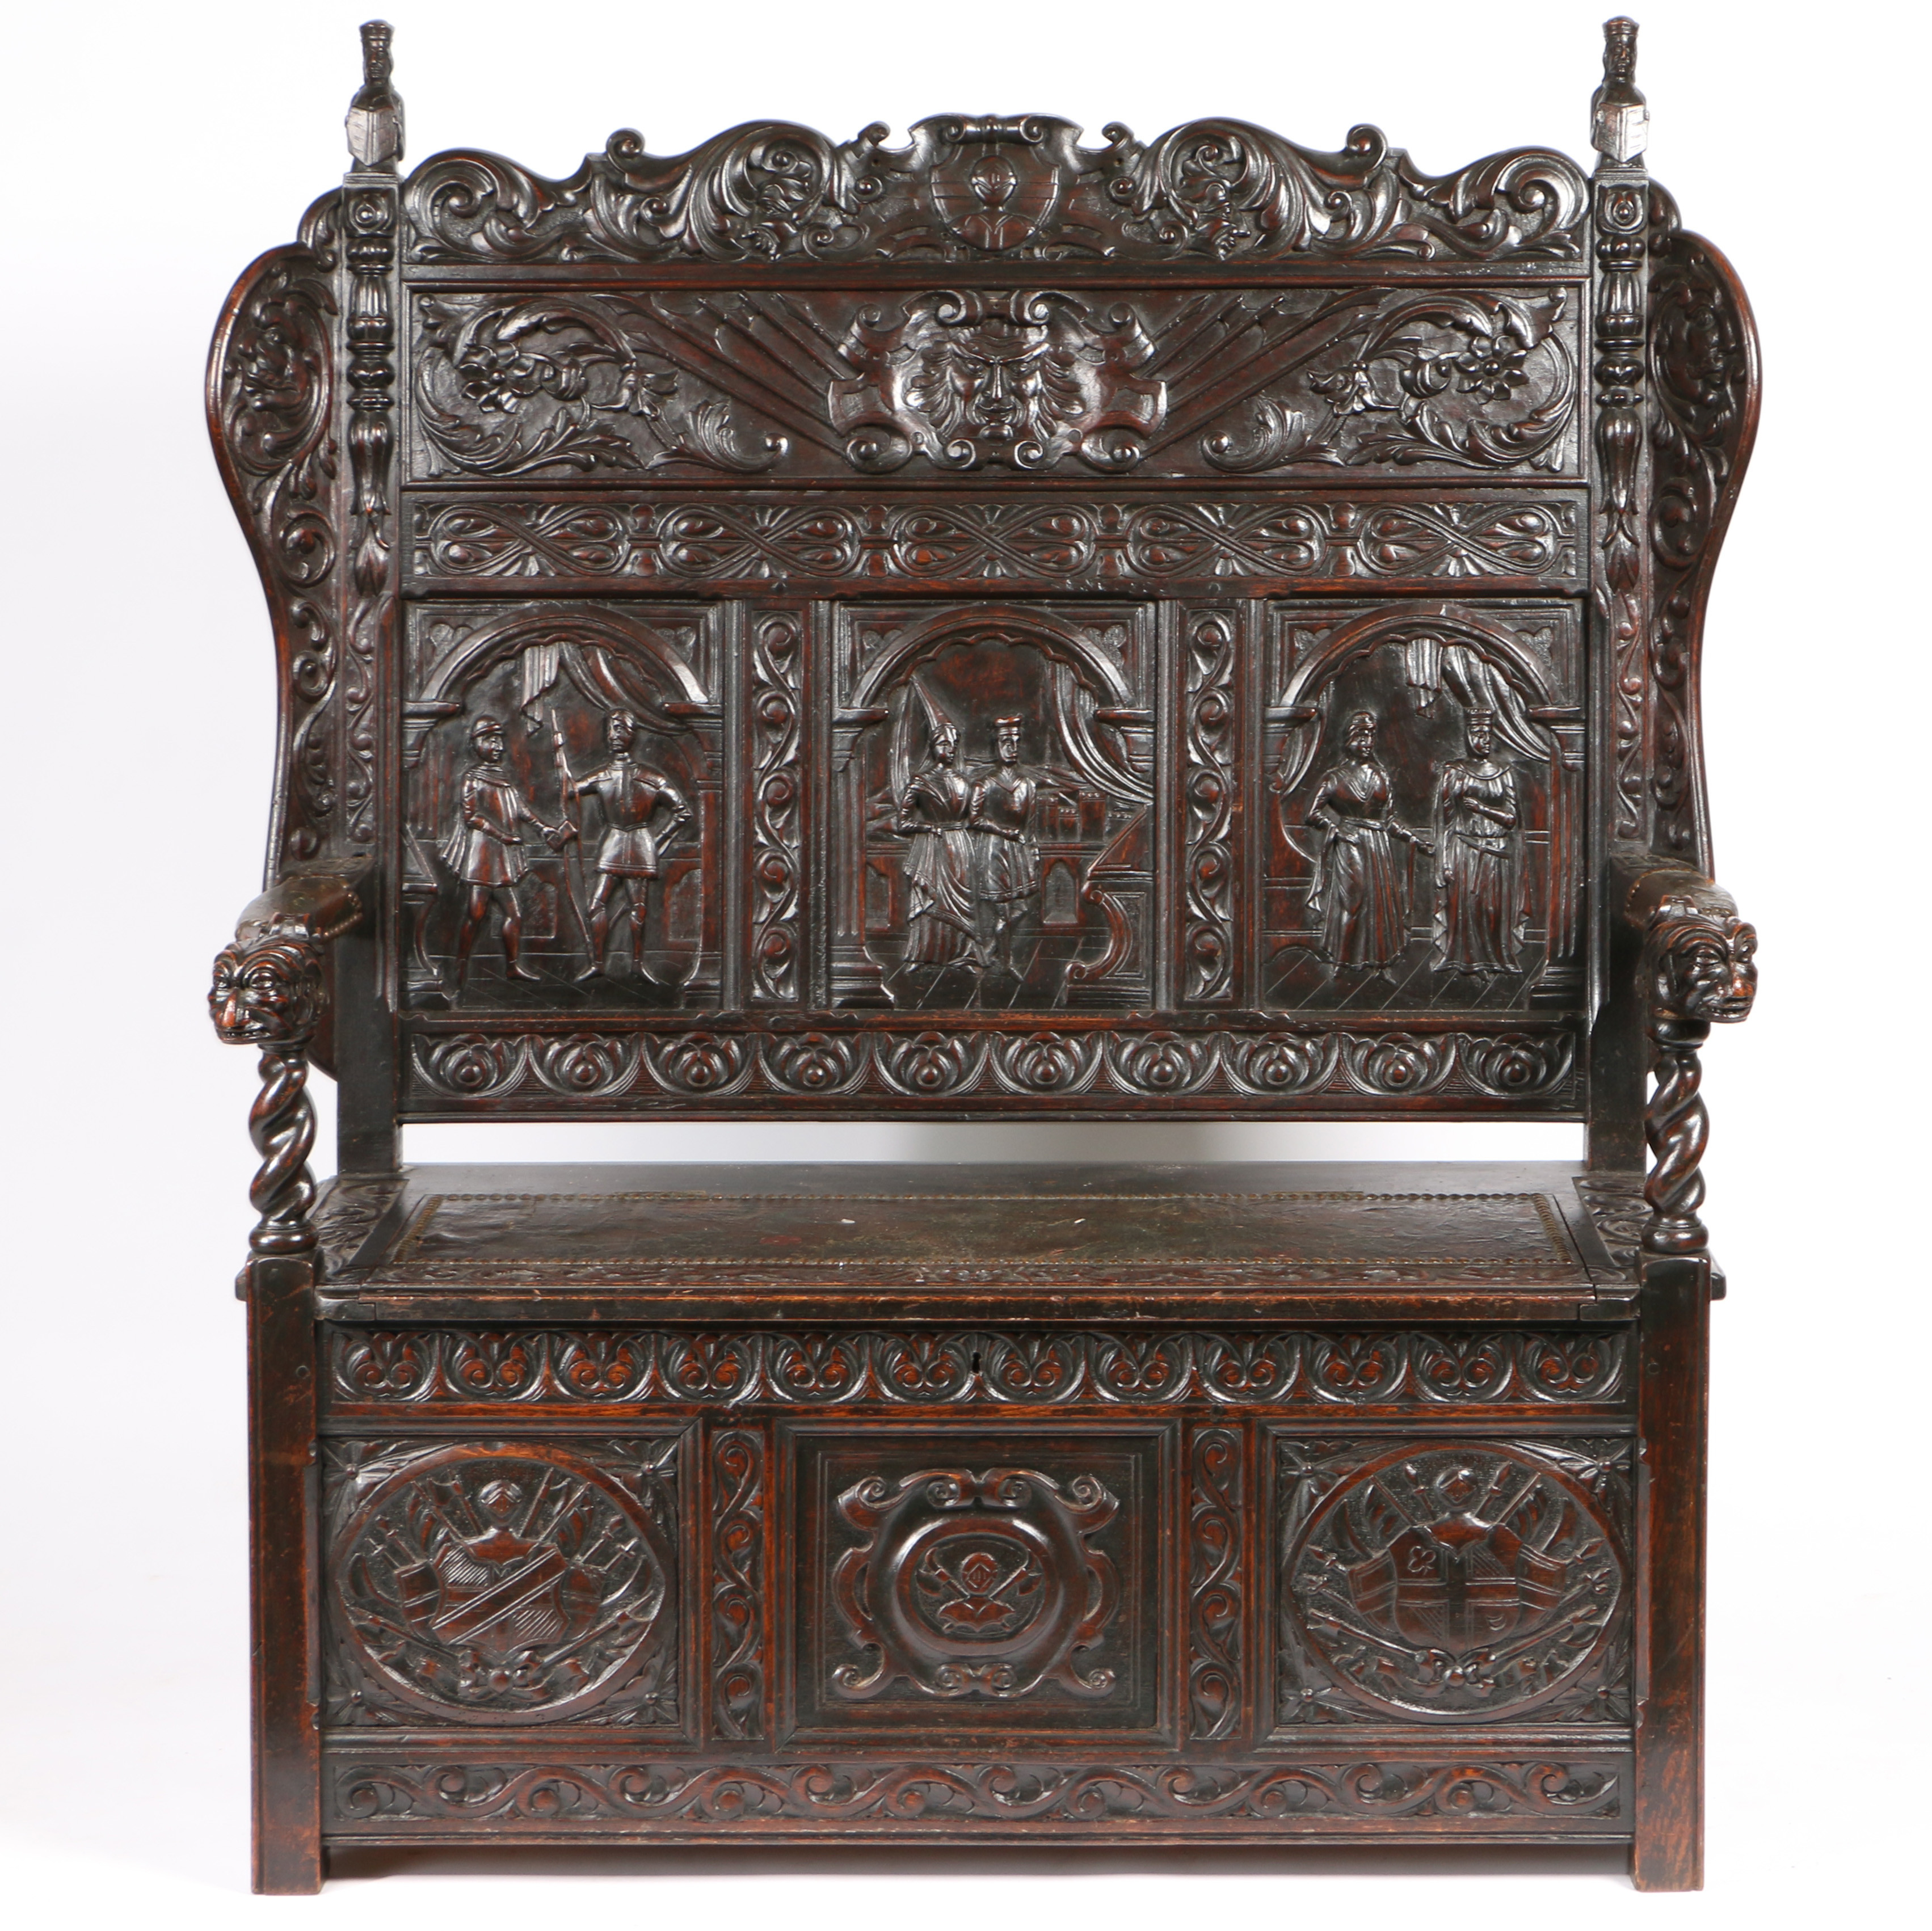 A 19TH CENTURY OAK SETTLE IN THE 17TH CENTURY MANNER.